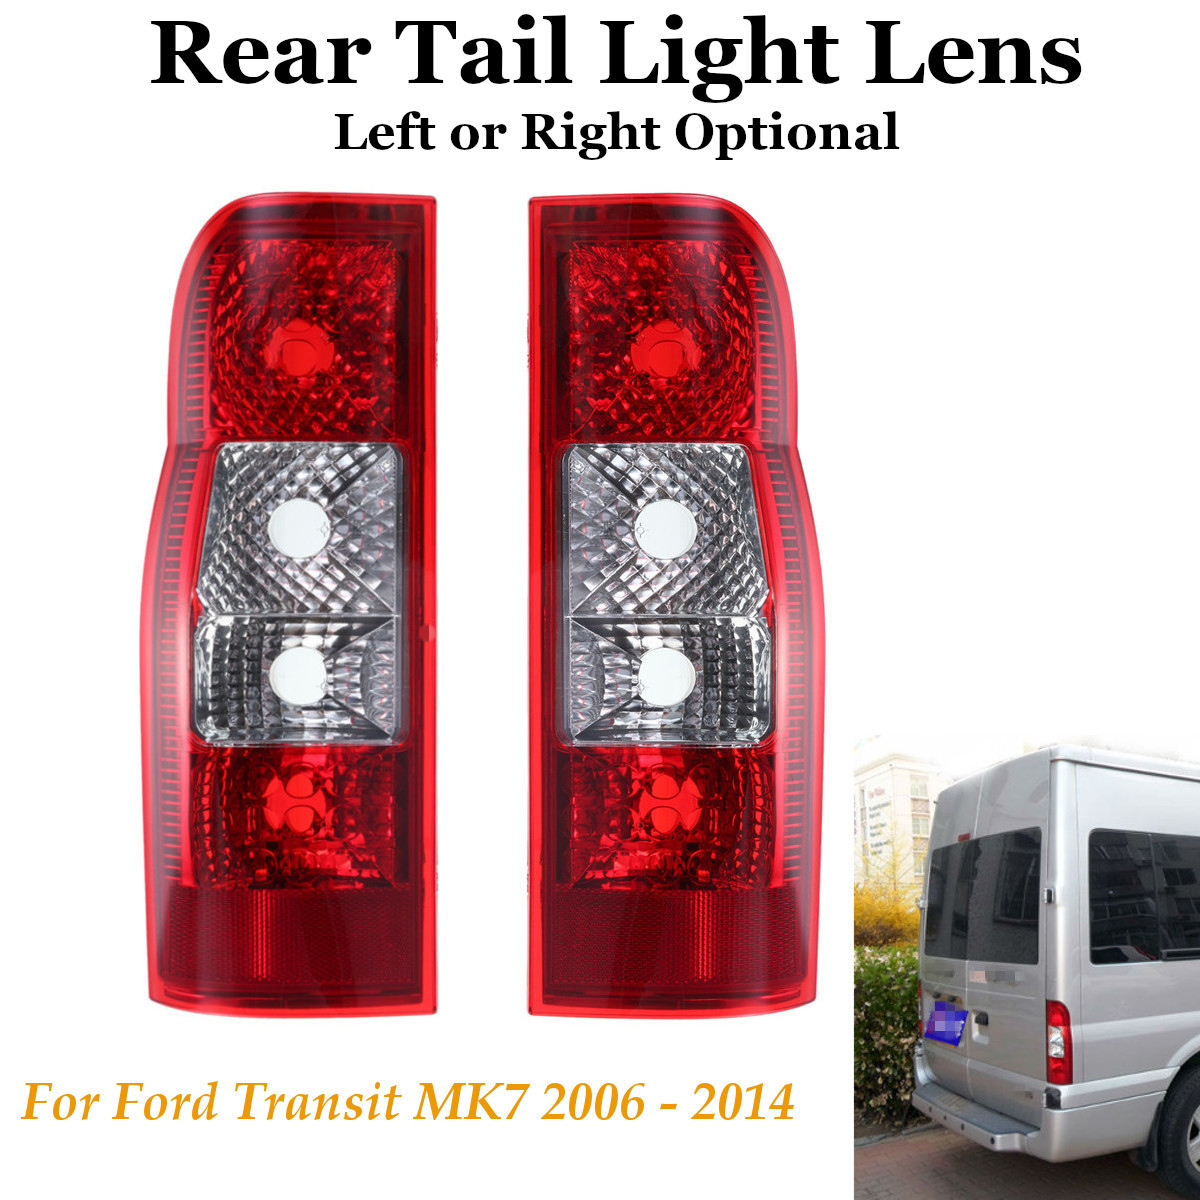 Ford Transit Mk7 2006-2014 Clear Rear Tail Light Lamps Pair Left & Right